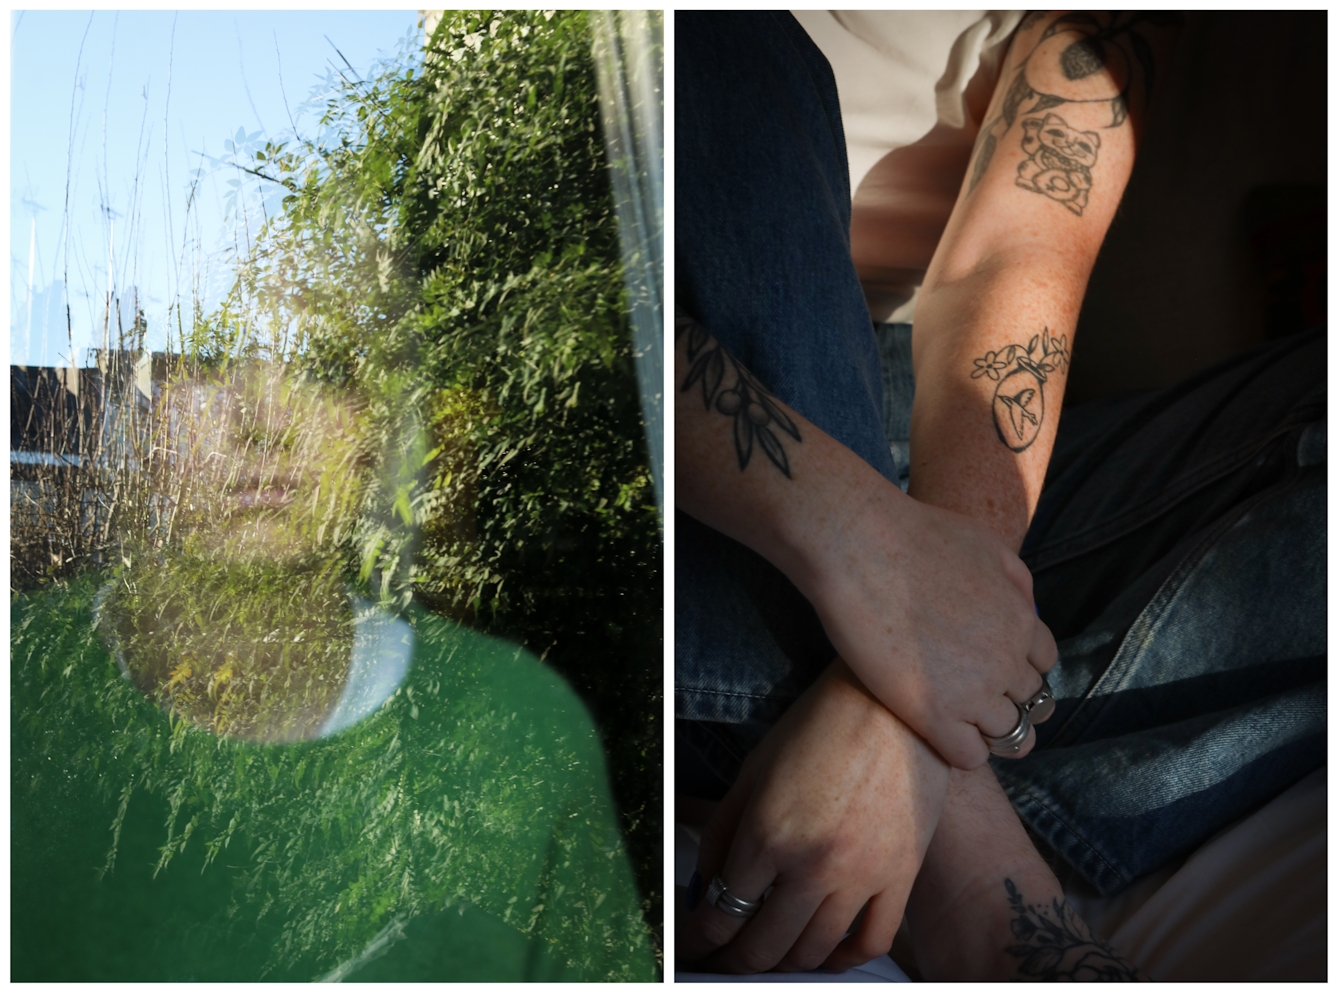 Photographic diptych. The image on the left show a young woman in a green jumper looking out from behind the glass of a window. Her face and shoulders are disrupted and fragmented by the reflection on the glass of the outside space which shows green leaves, trees, the rooftops of other houses and a blue sky. The image on the right shows the same young woman, but this time she is sat indoor and we can just see her bare arms clasped around her raised legs. Her arms and feet show several tattoos, deputising birds and flowers.